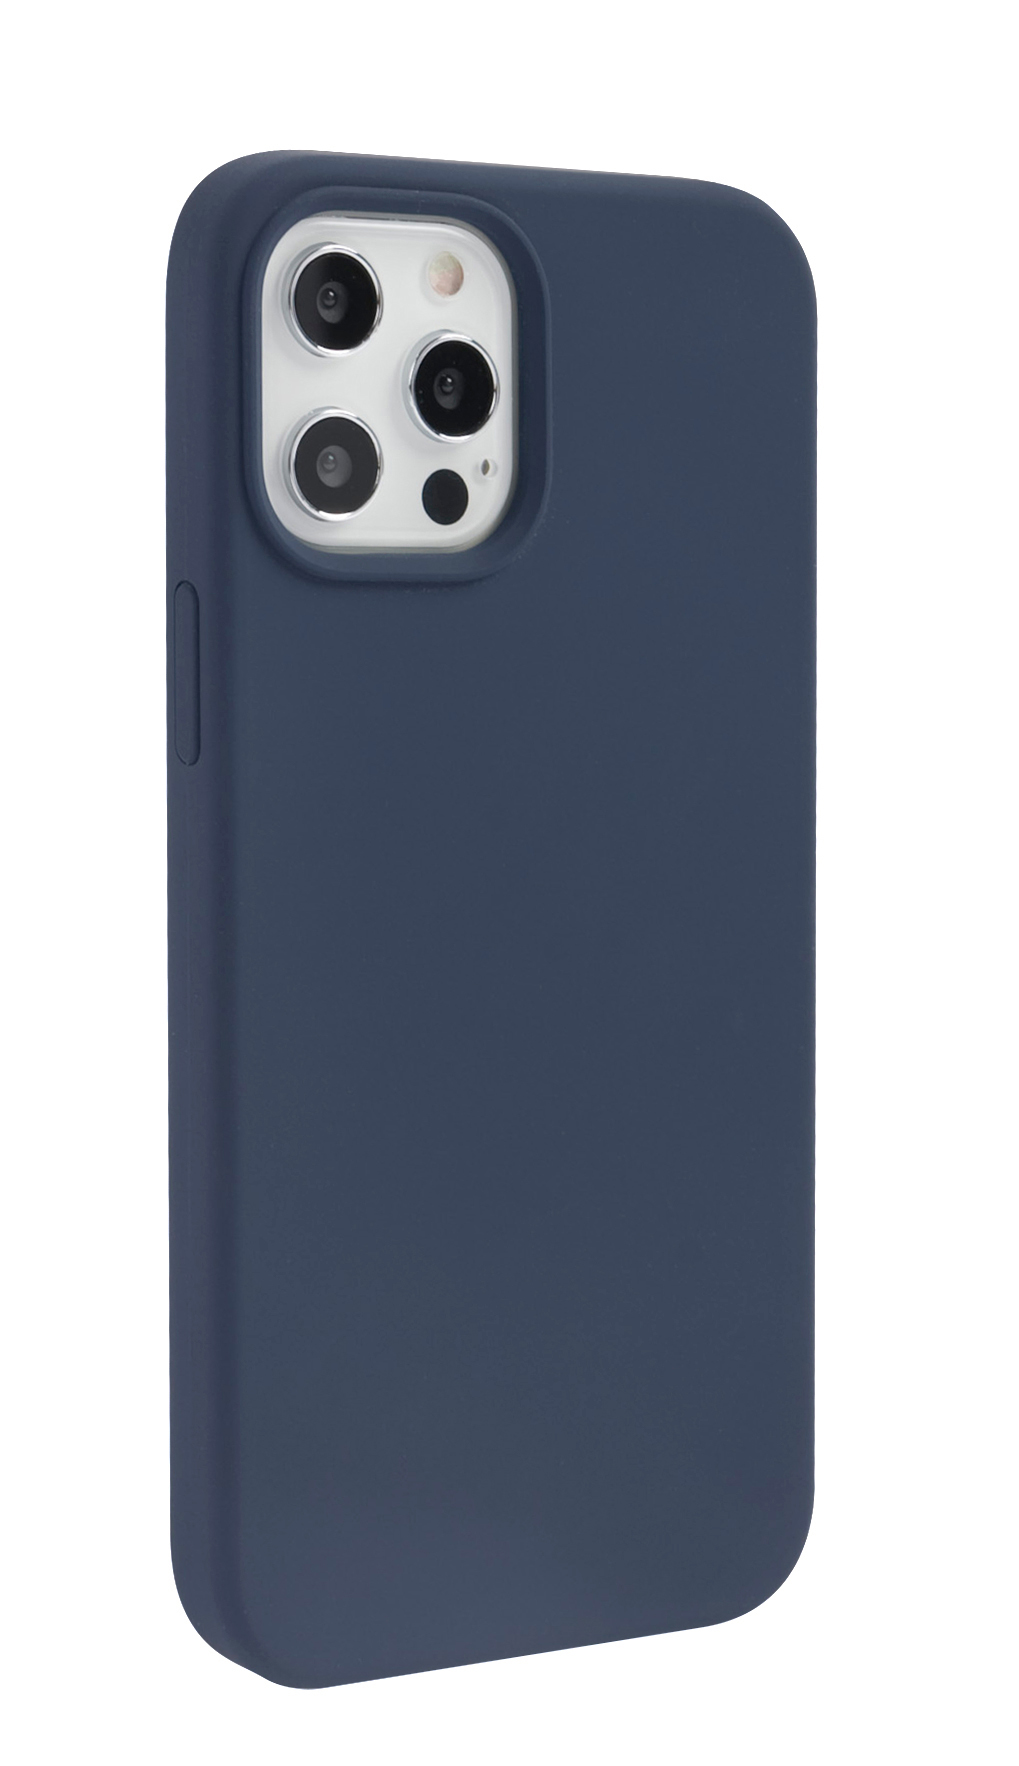 Apple, Blau iPhone Pro Max, Backcover, ISY ISC-2106, 12